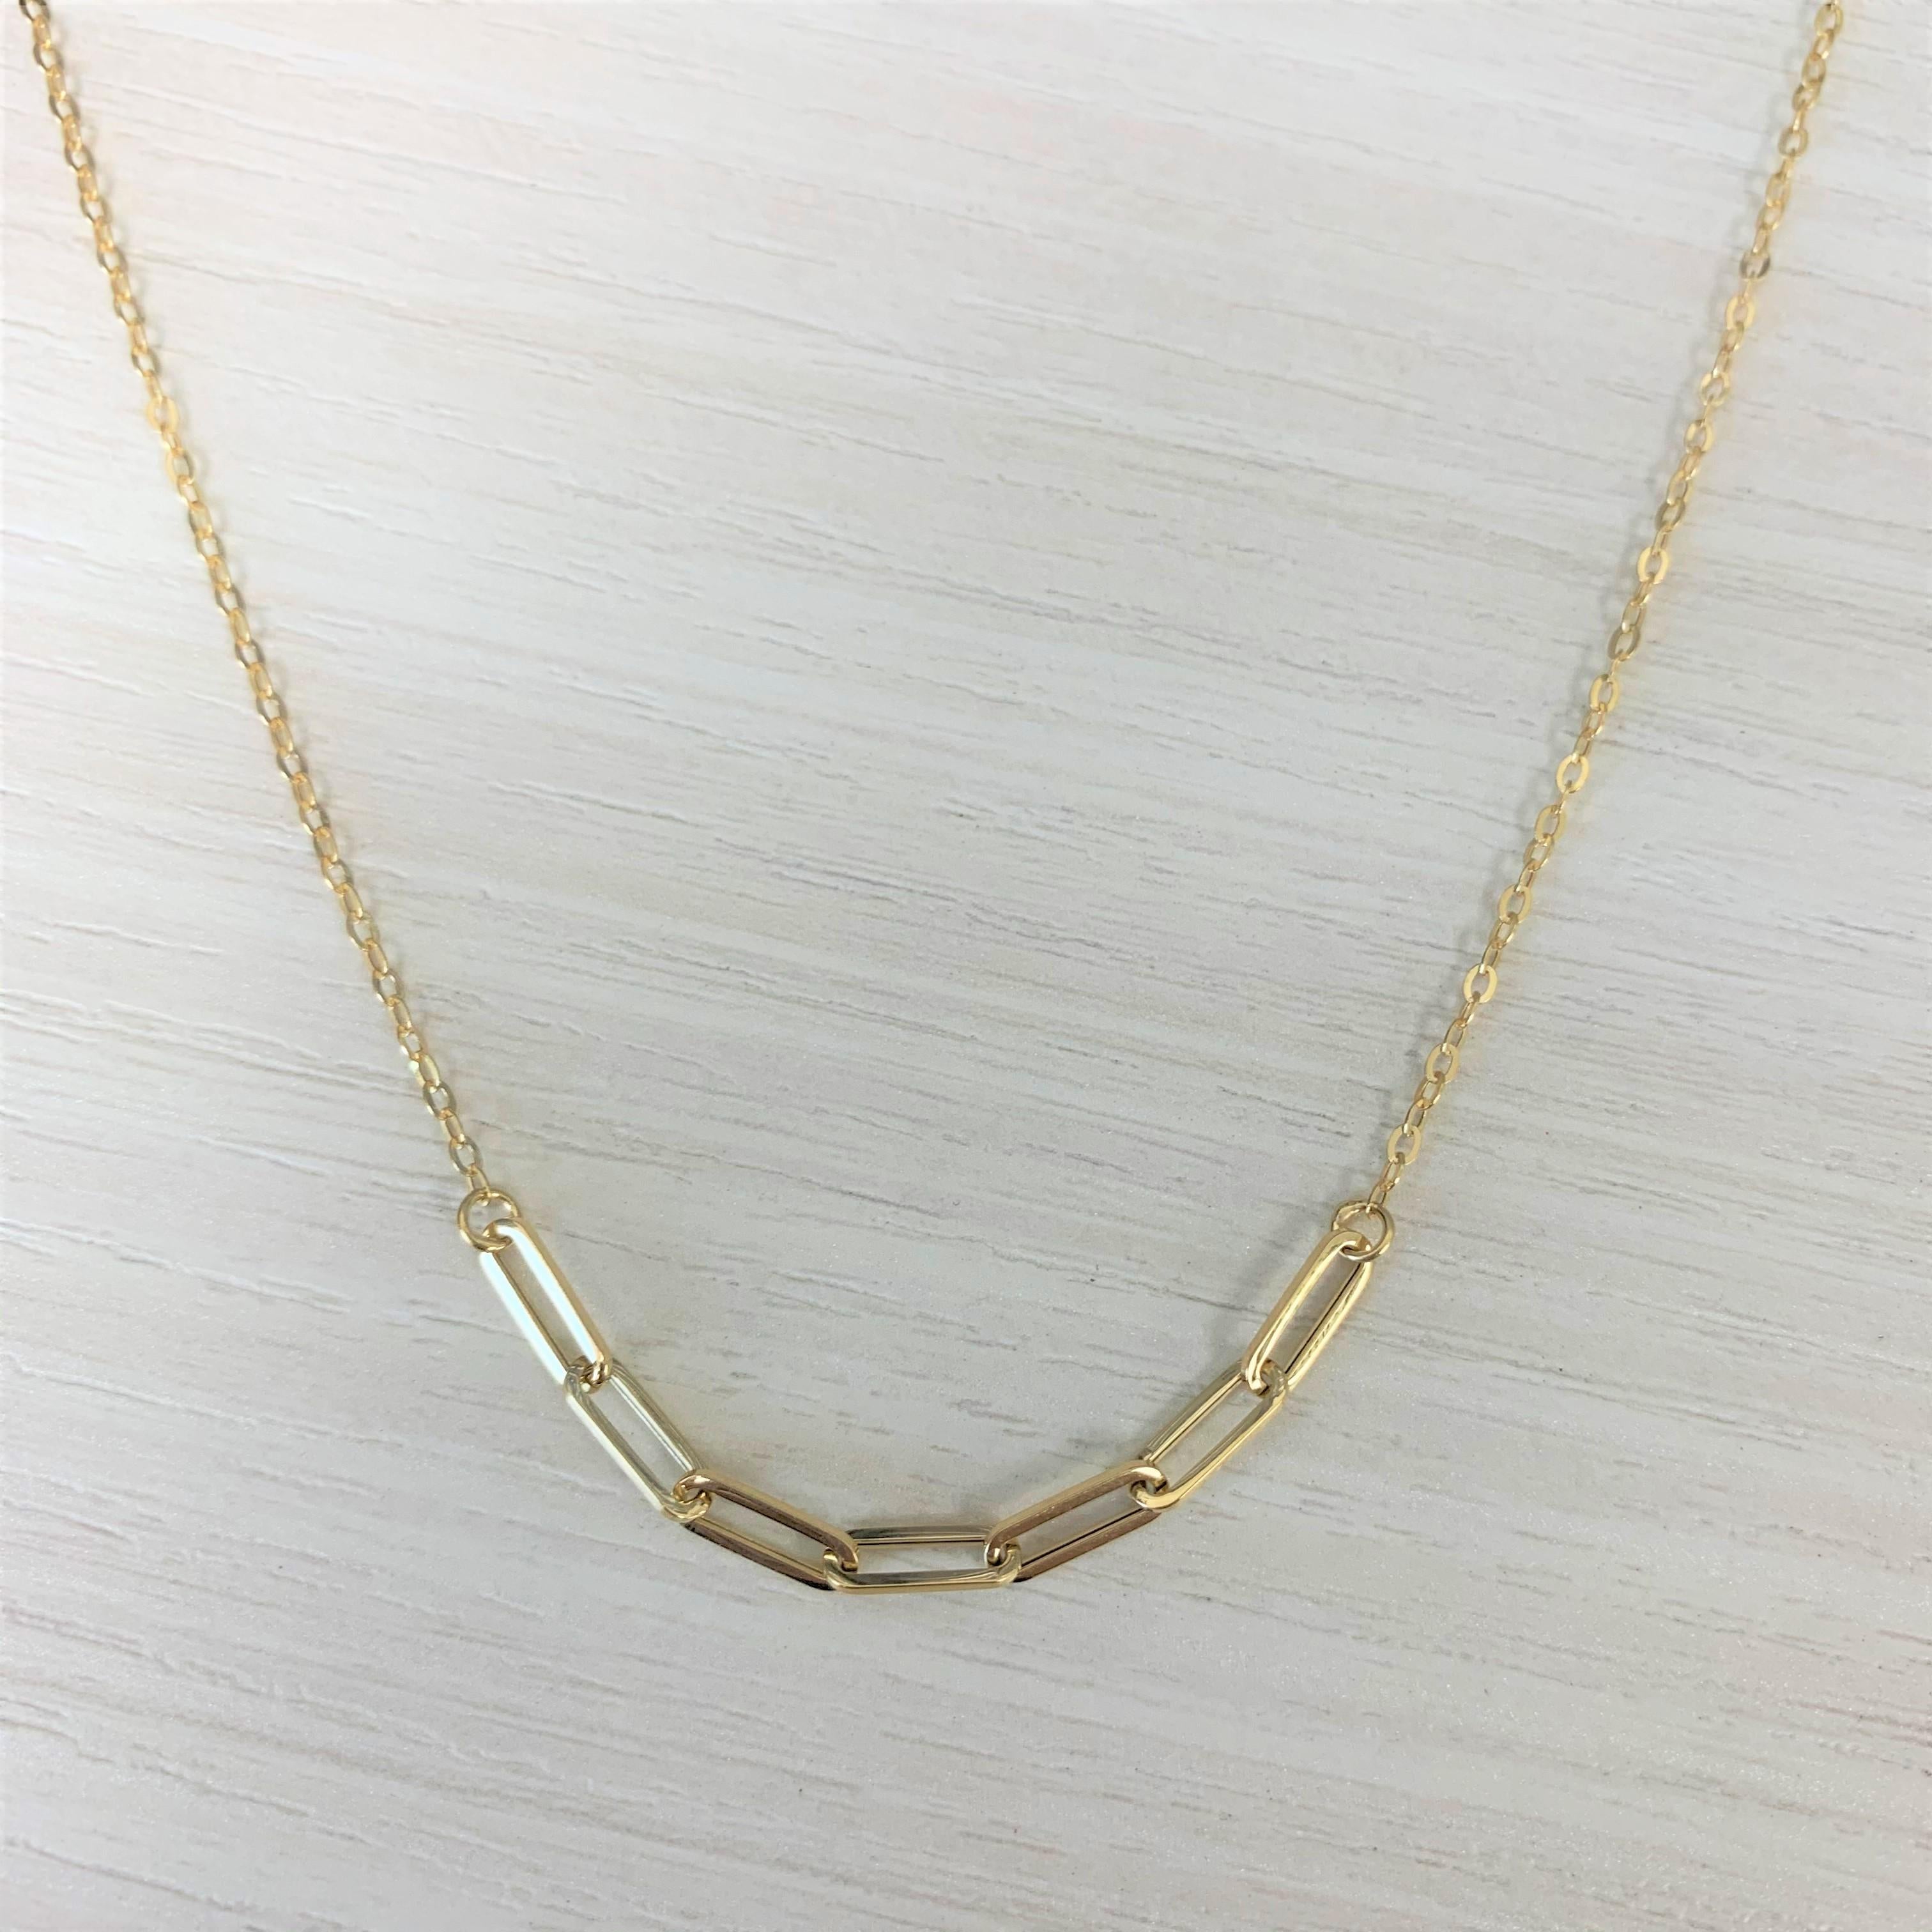 Contemporary 14 Karat Yellow Gold 1.40 Grams Paperclip Link Chain Necklace, Gifts for Her For Sale